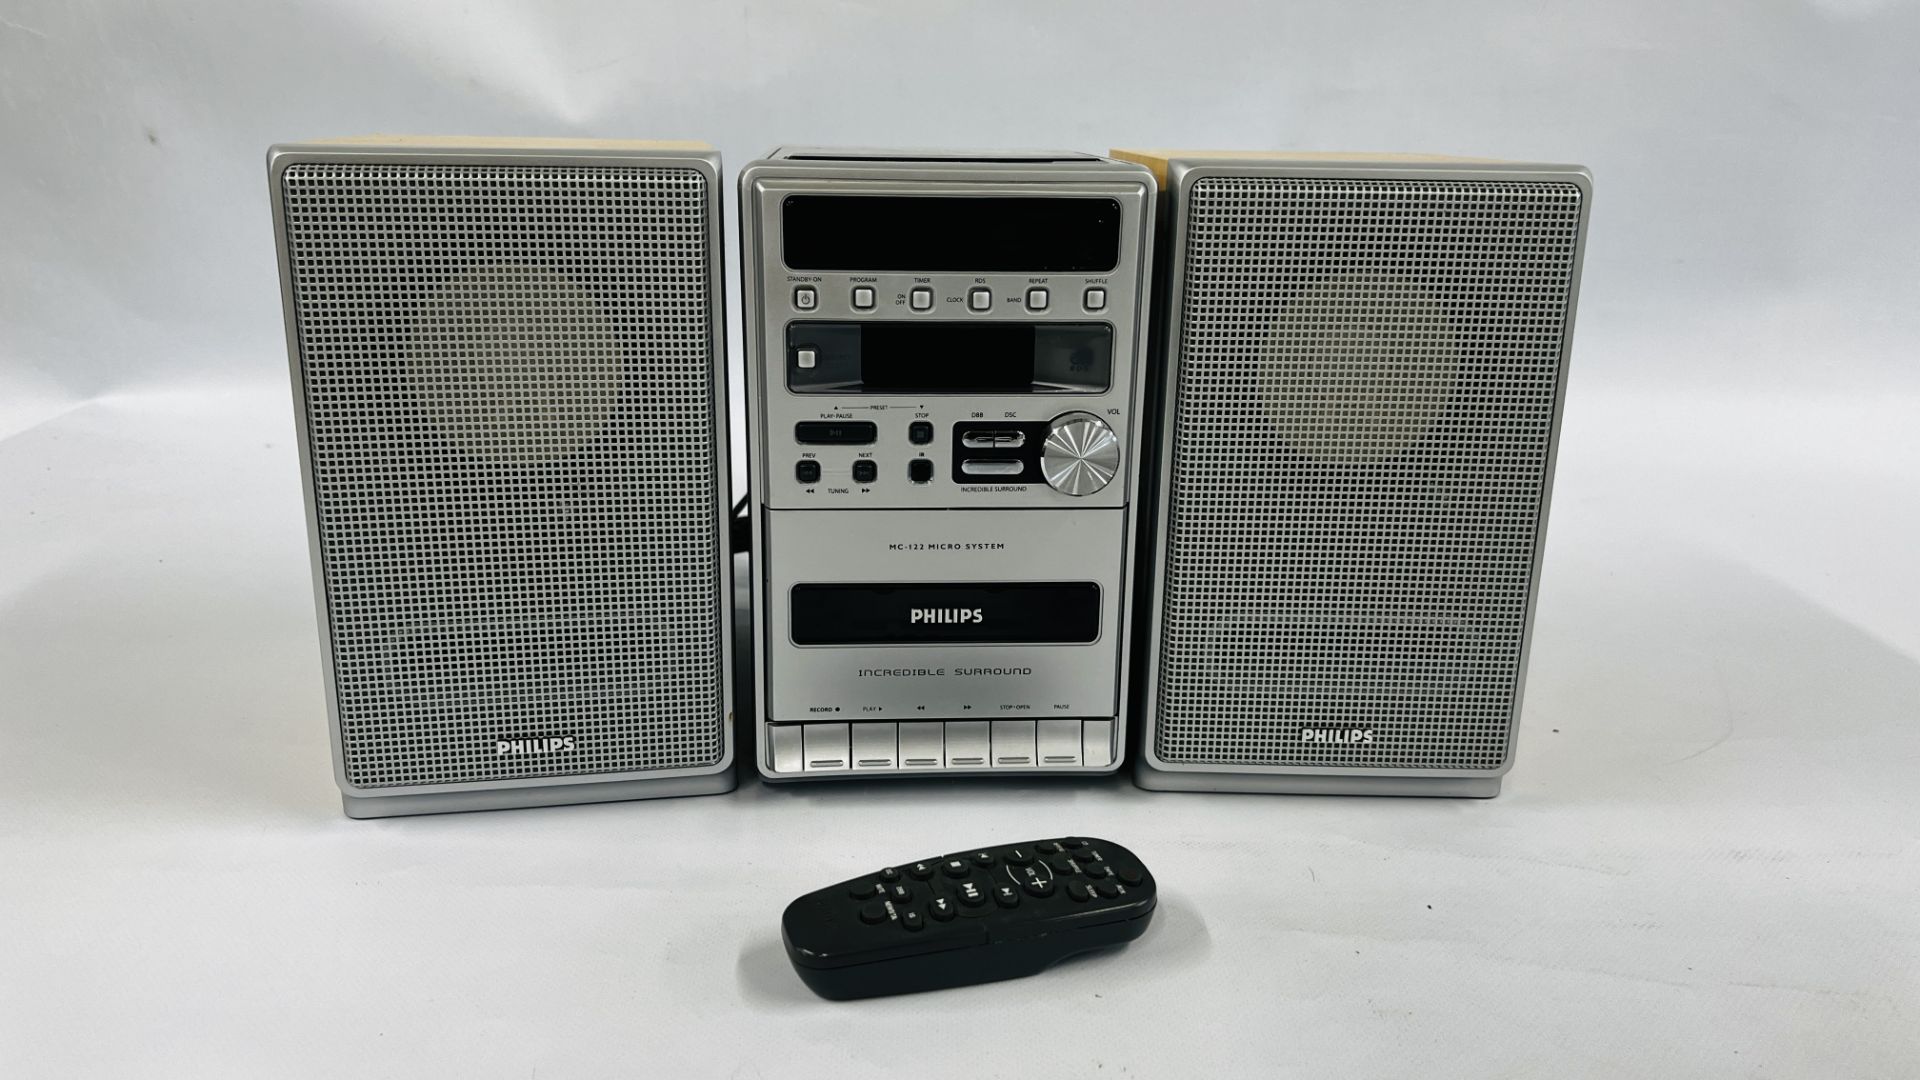 PHILIPS BOOKSHELF HI-FI WITH REMOTE - SOLD AS SEEN